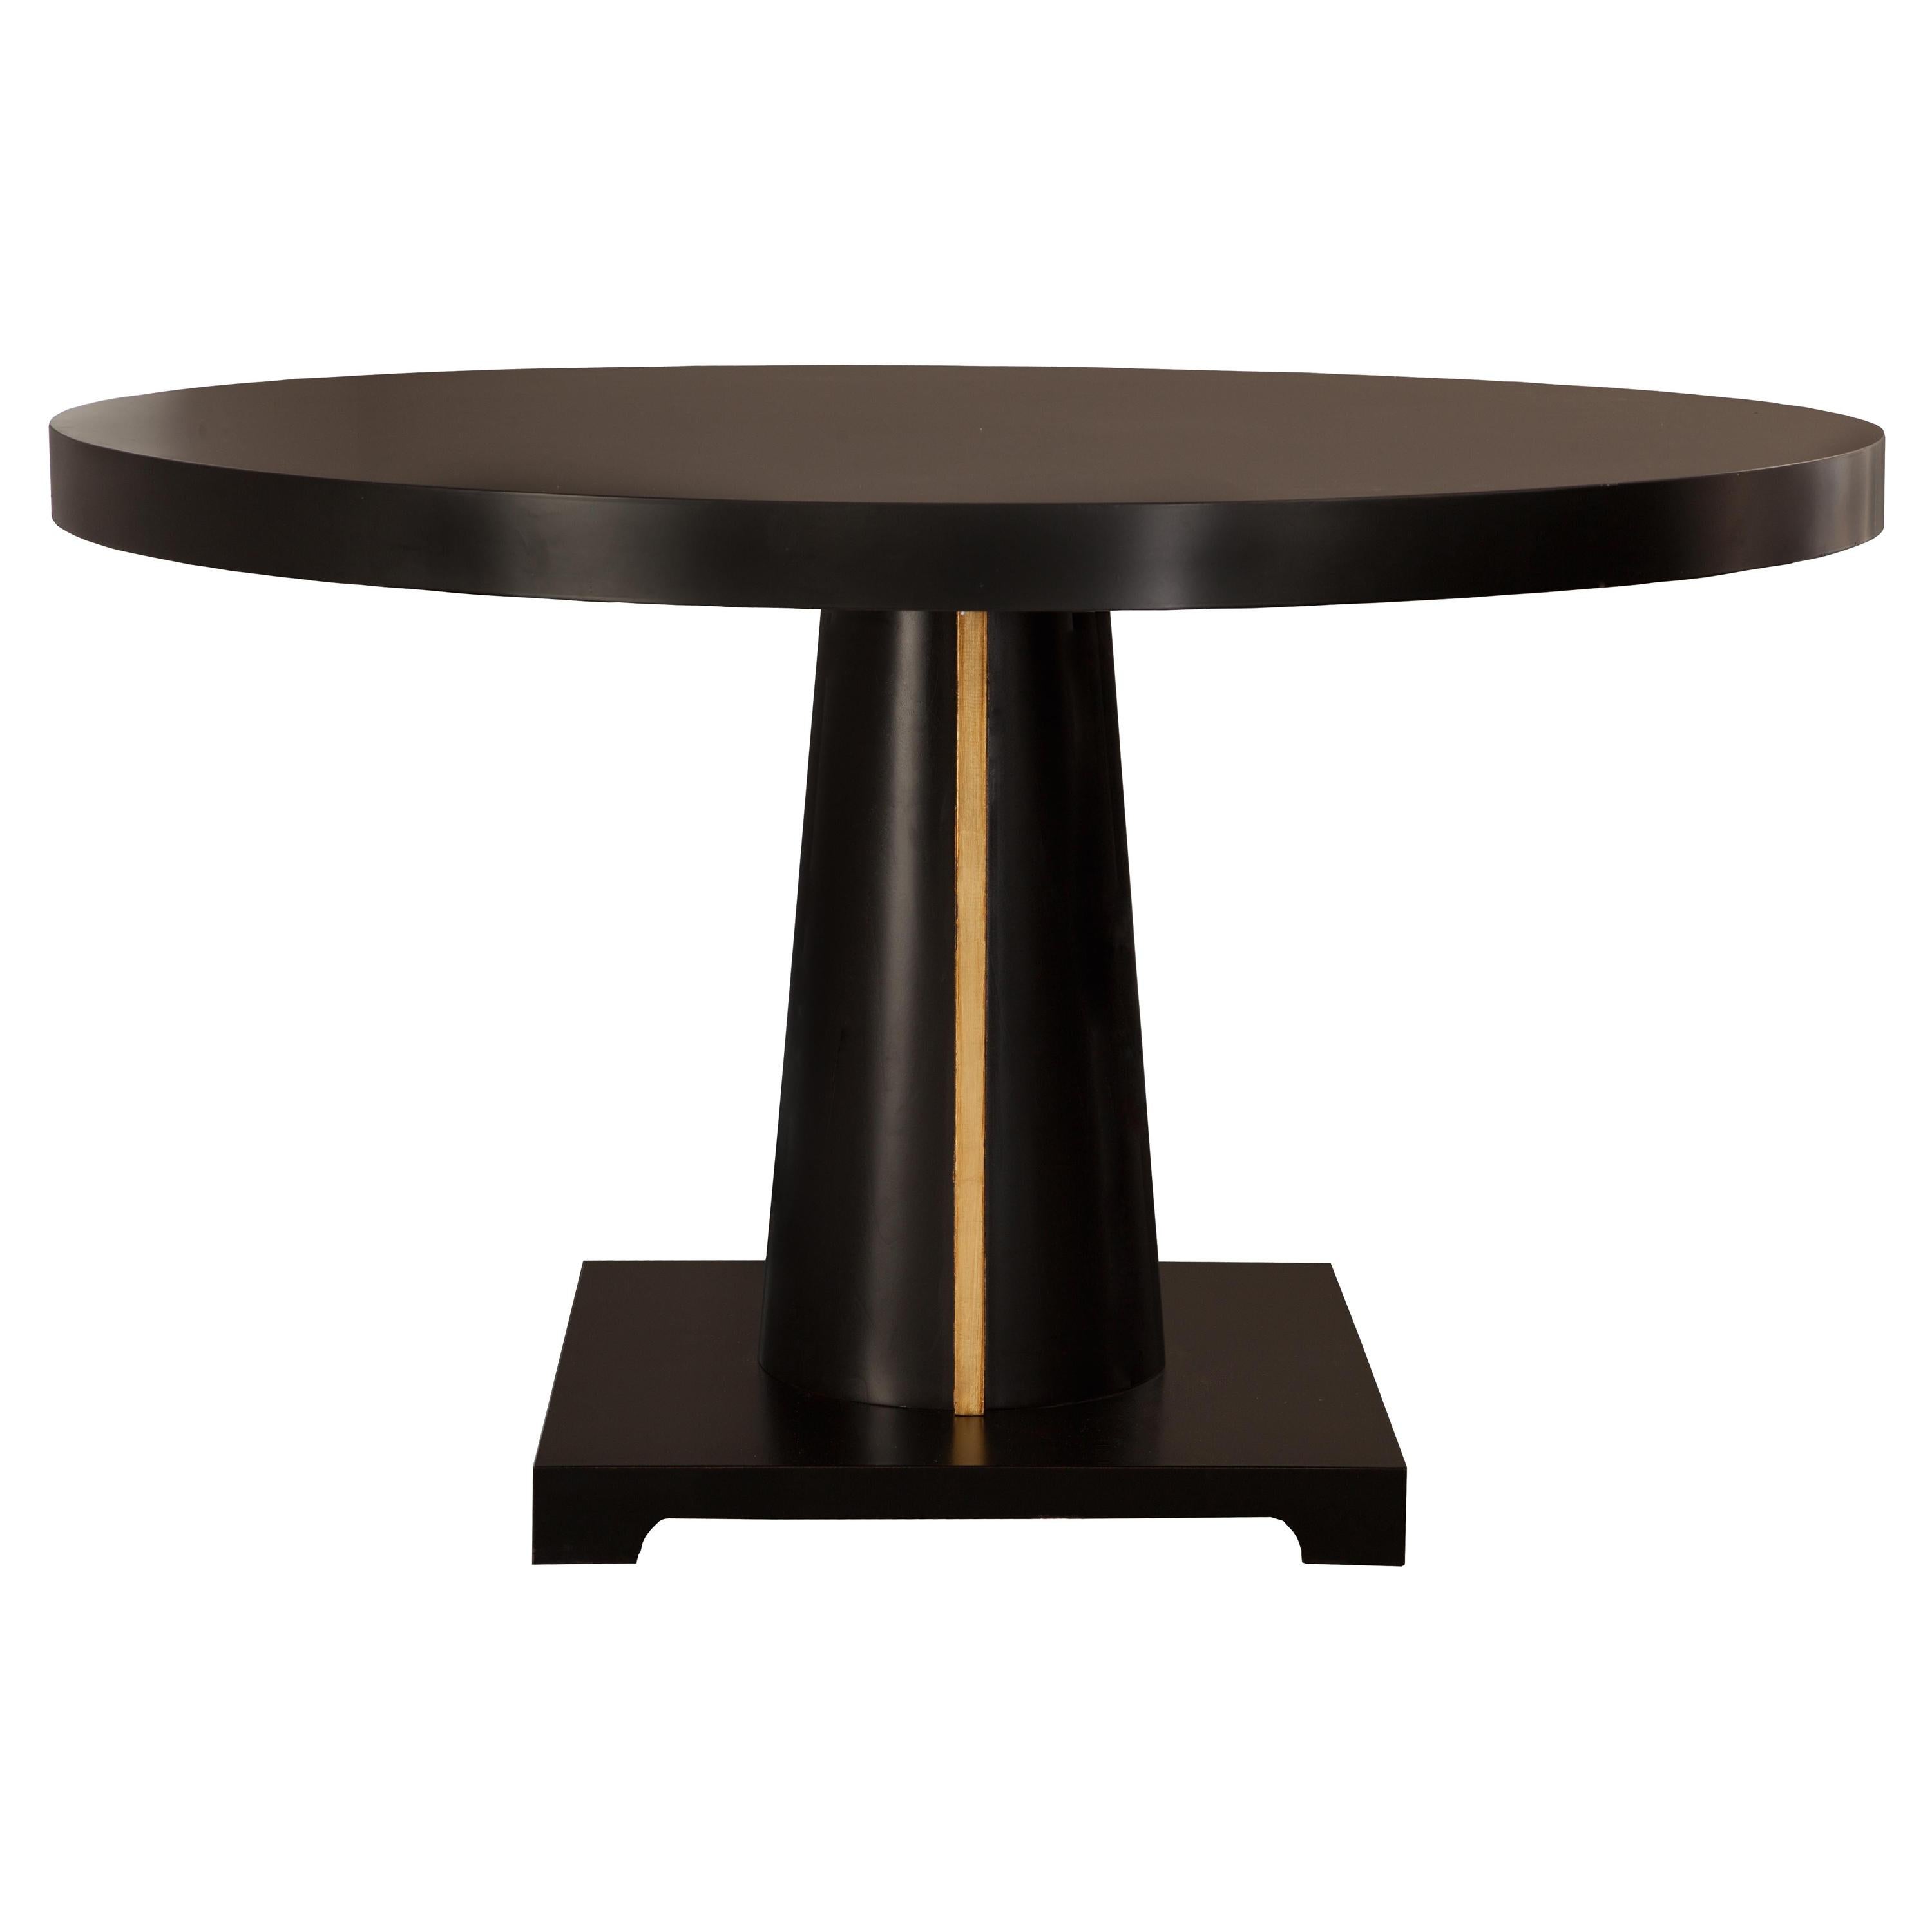 Isabella Costantini, Italy, Olimpia Dining Table